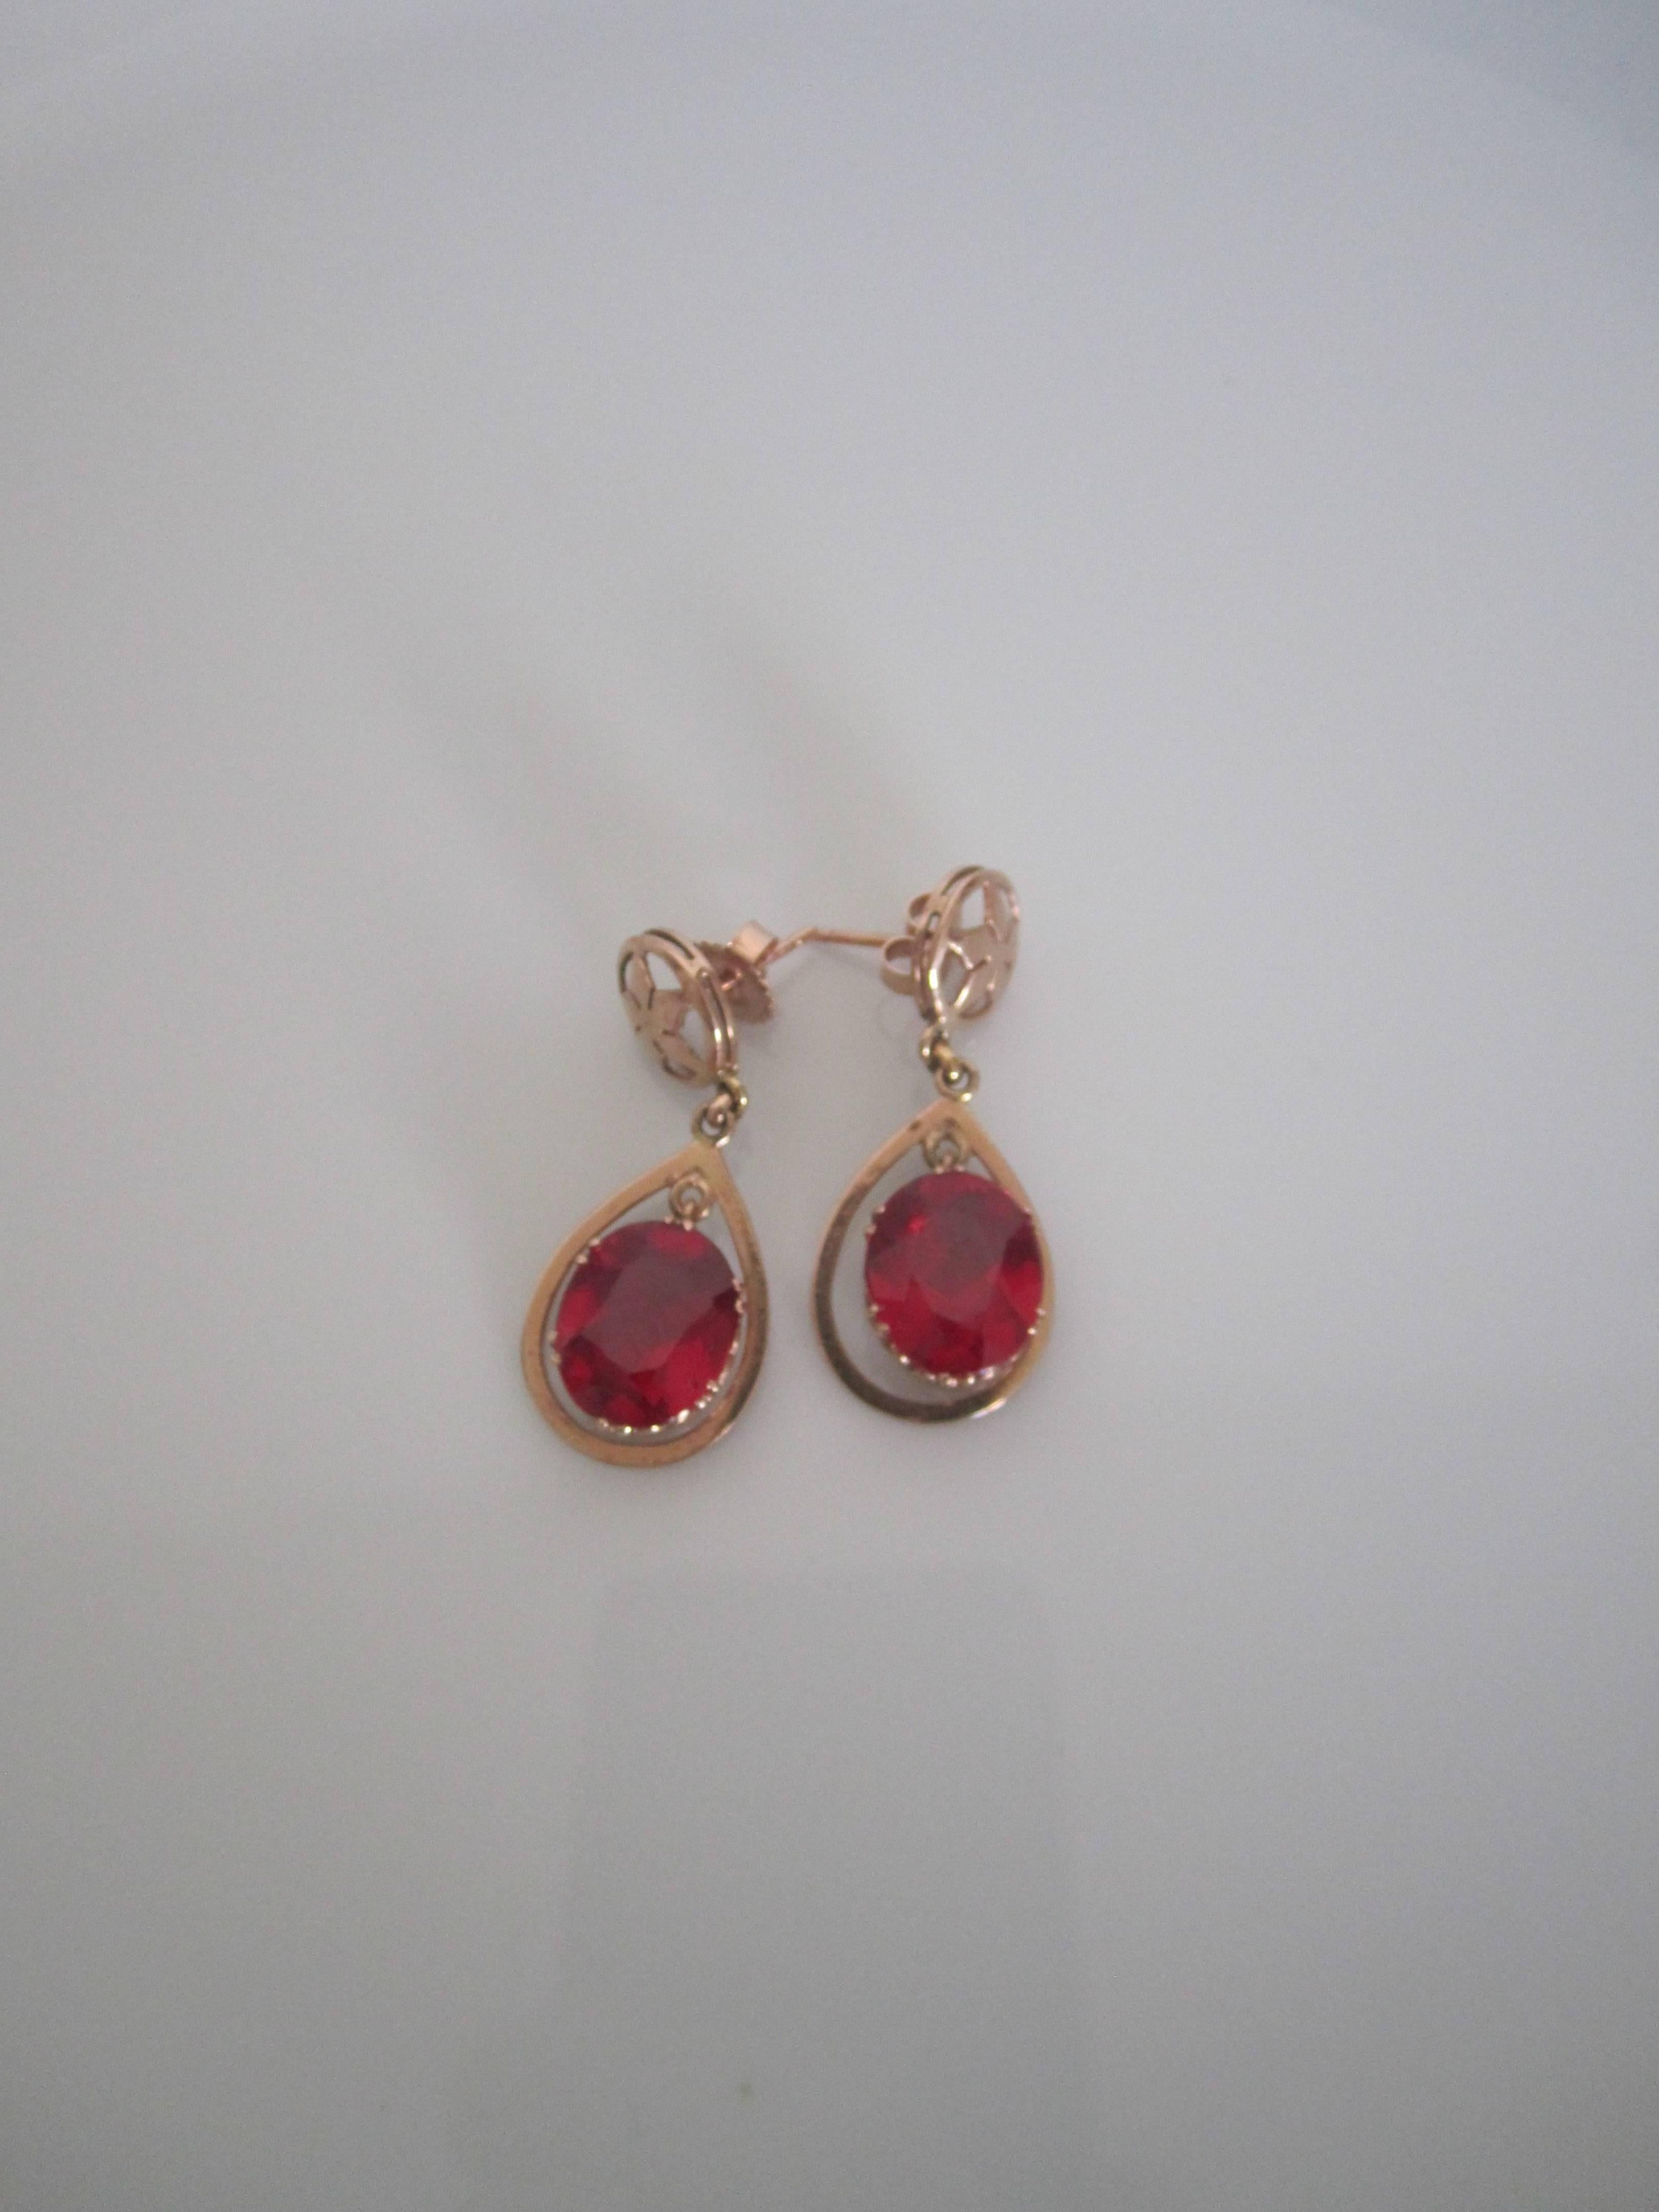 A beautiful pair of vintage 14-karat pink or rose gold earrings with large red ruby-like stones, circa early to mid-20th century. Stones are set in a detailed 14-karat pink or rose gold setting. Backs have been newly adjusted to accommodate pierced